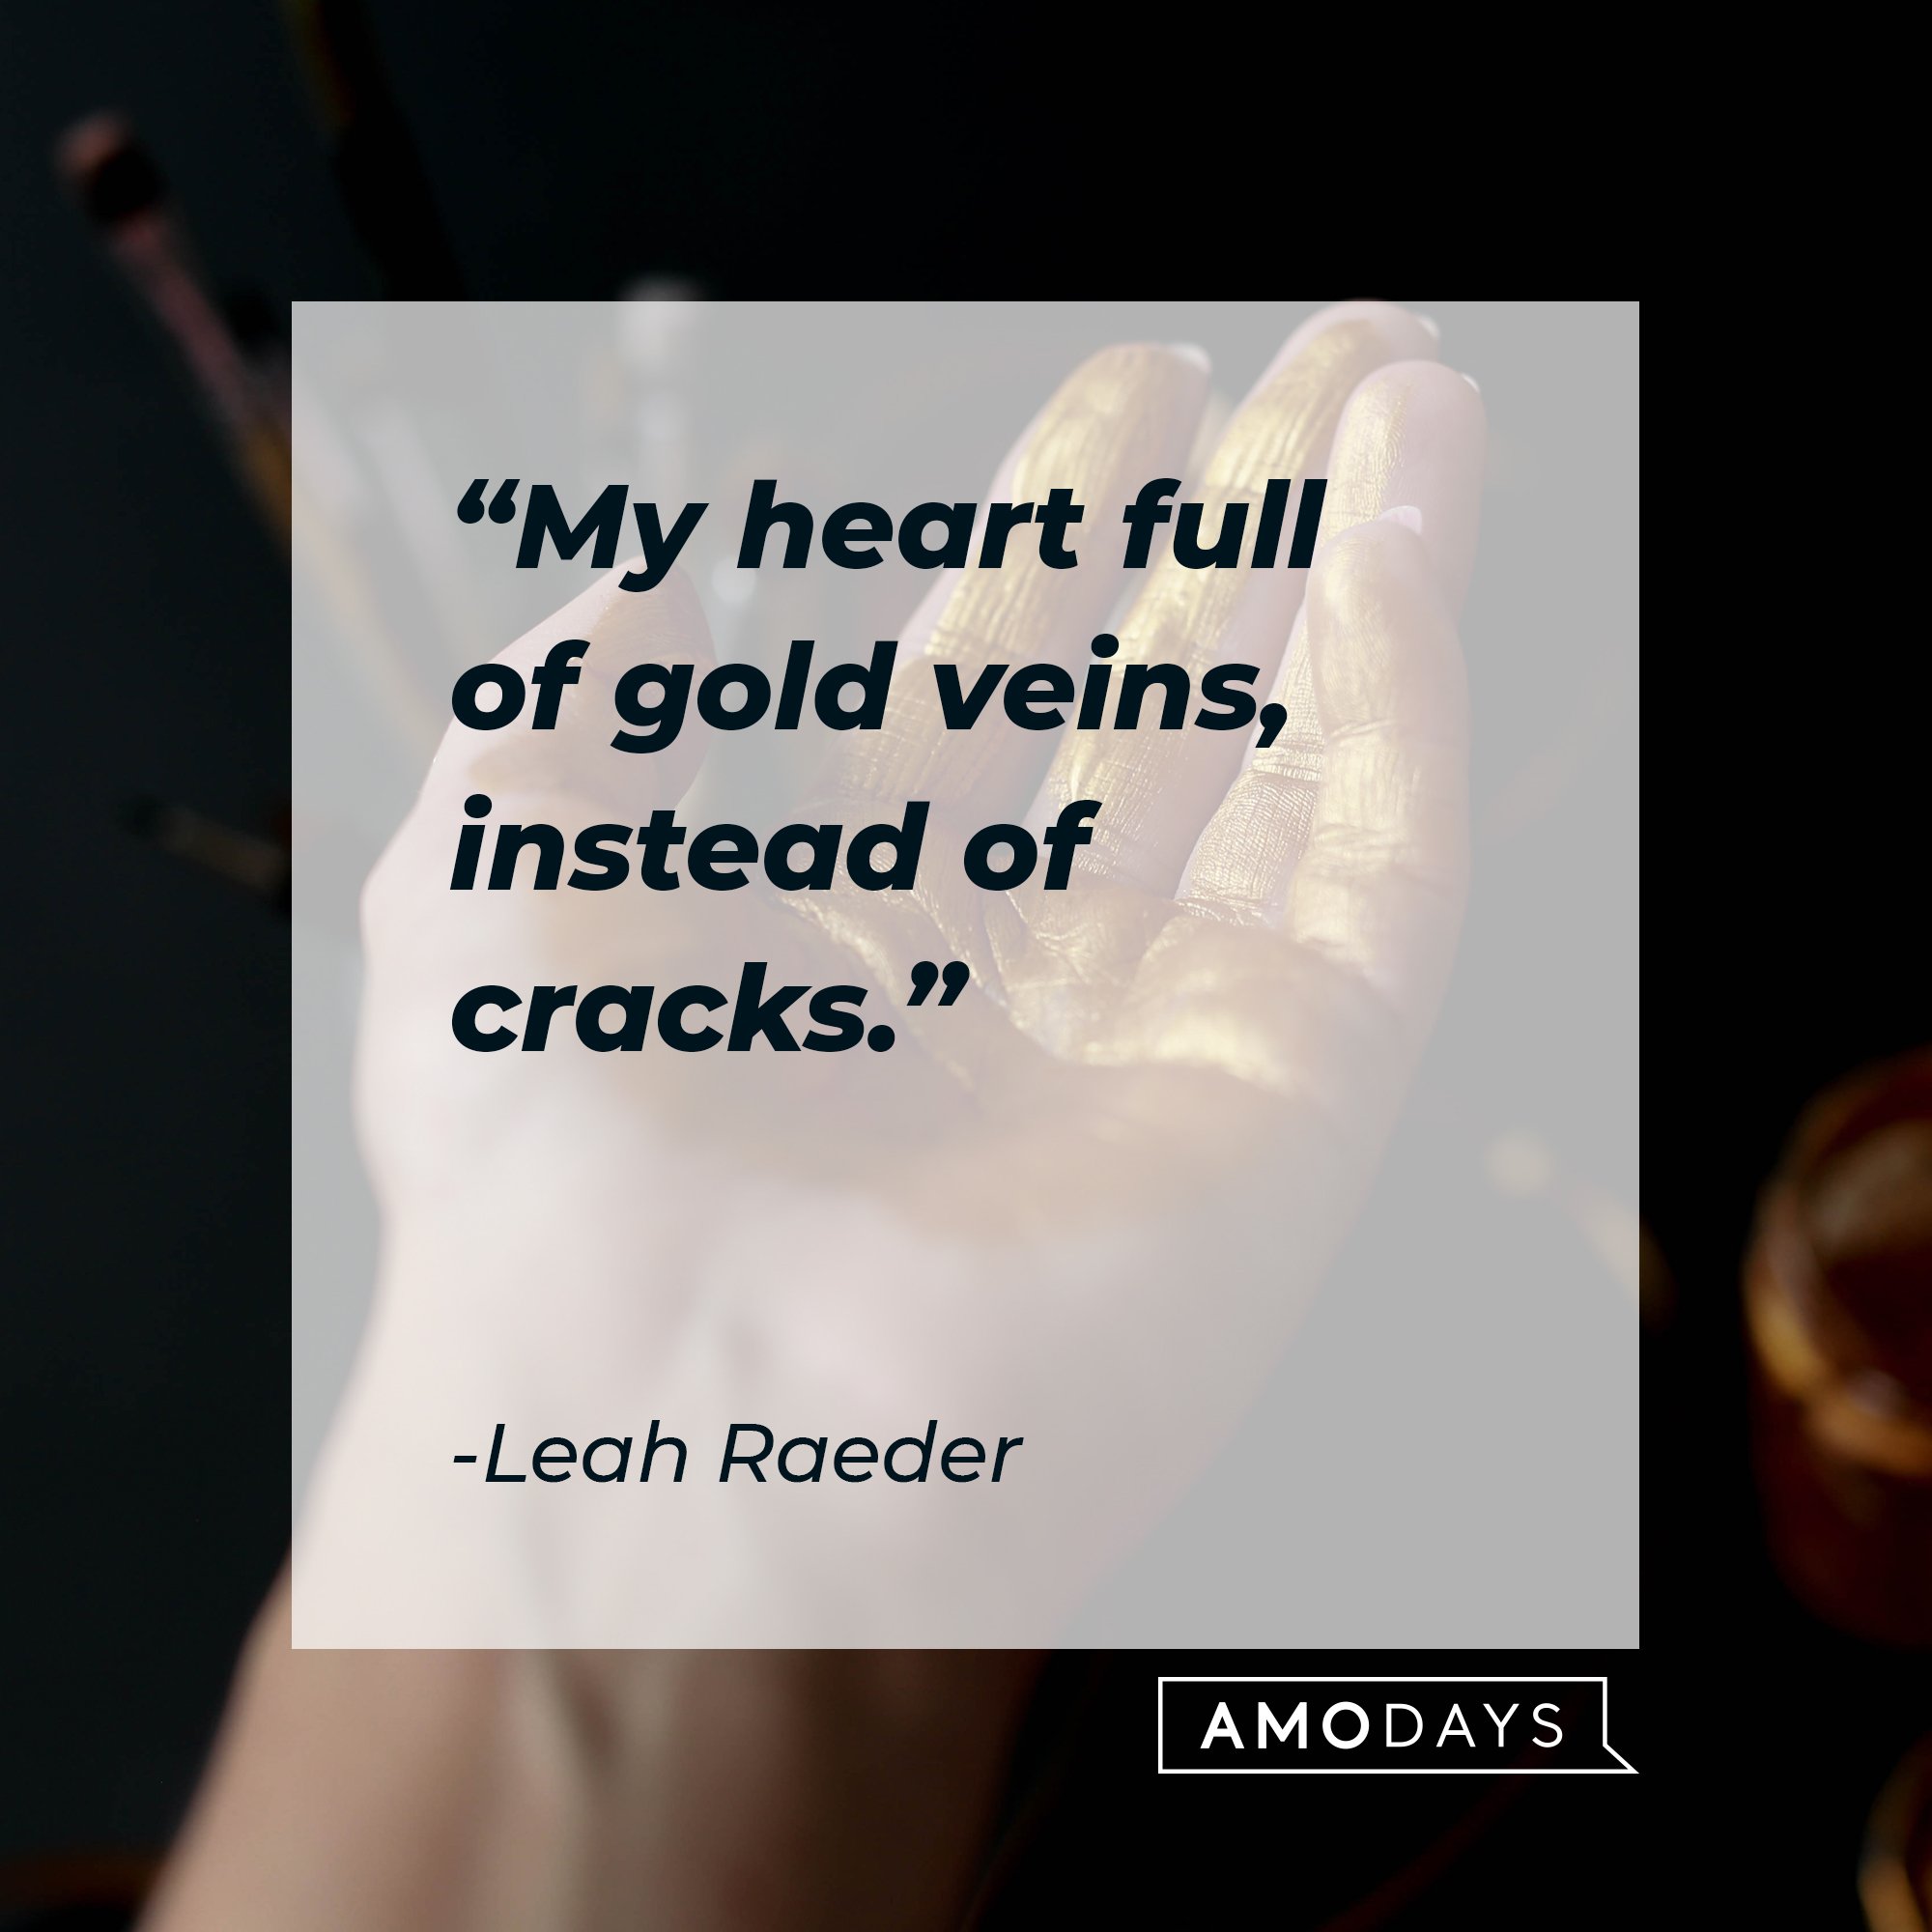  Leah Raeder’s quote: "My heart full of gold veins, instead of cracks." | Image: AmoDays